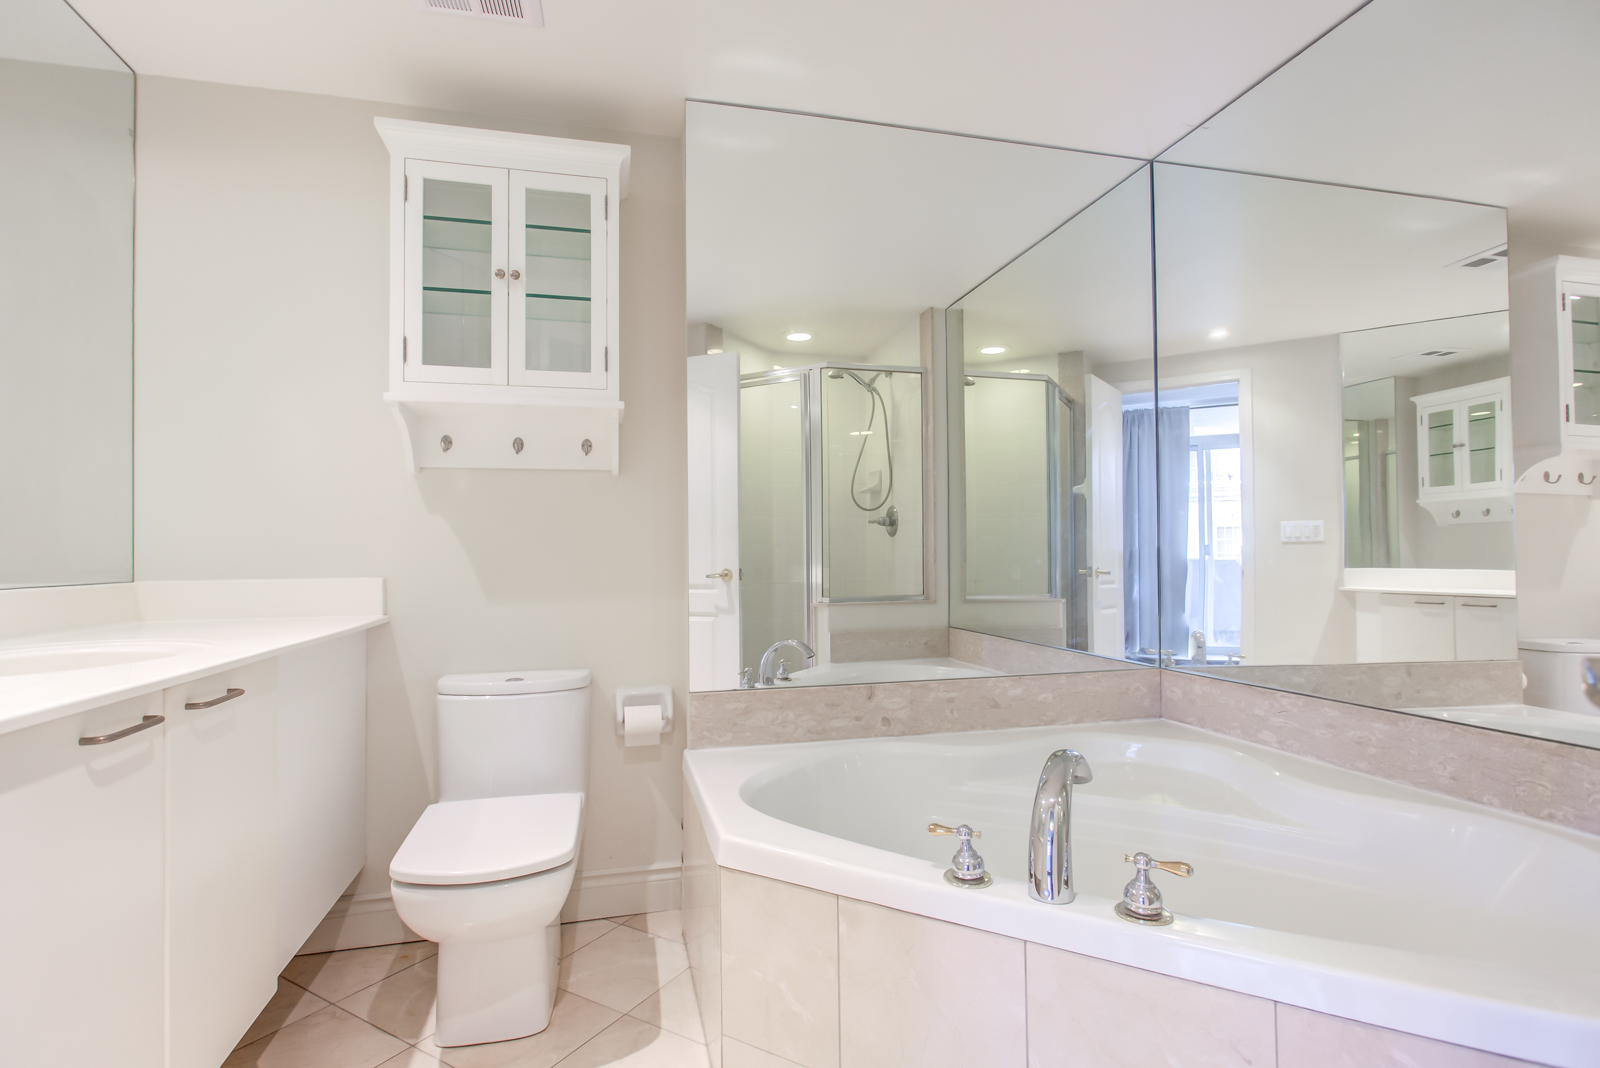 Ensuite bath with Jacuzzi, white sink and cabinet, and wall-to-wall mirrors.